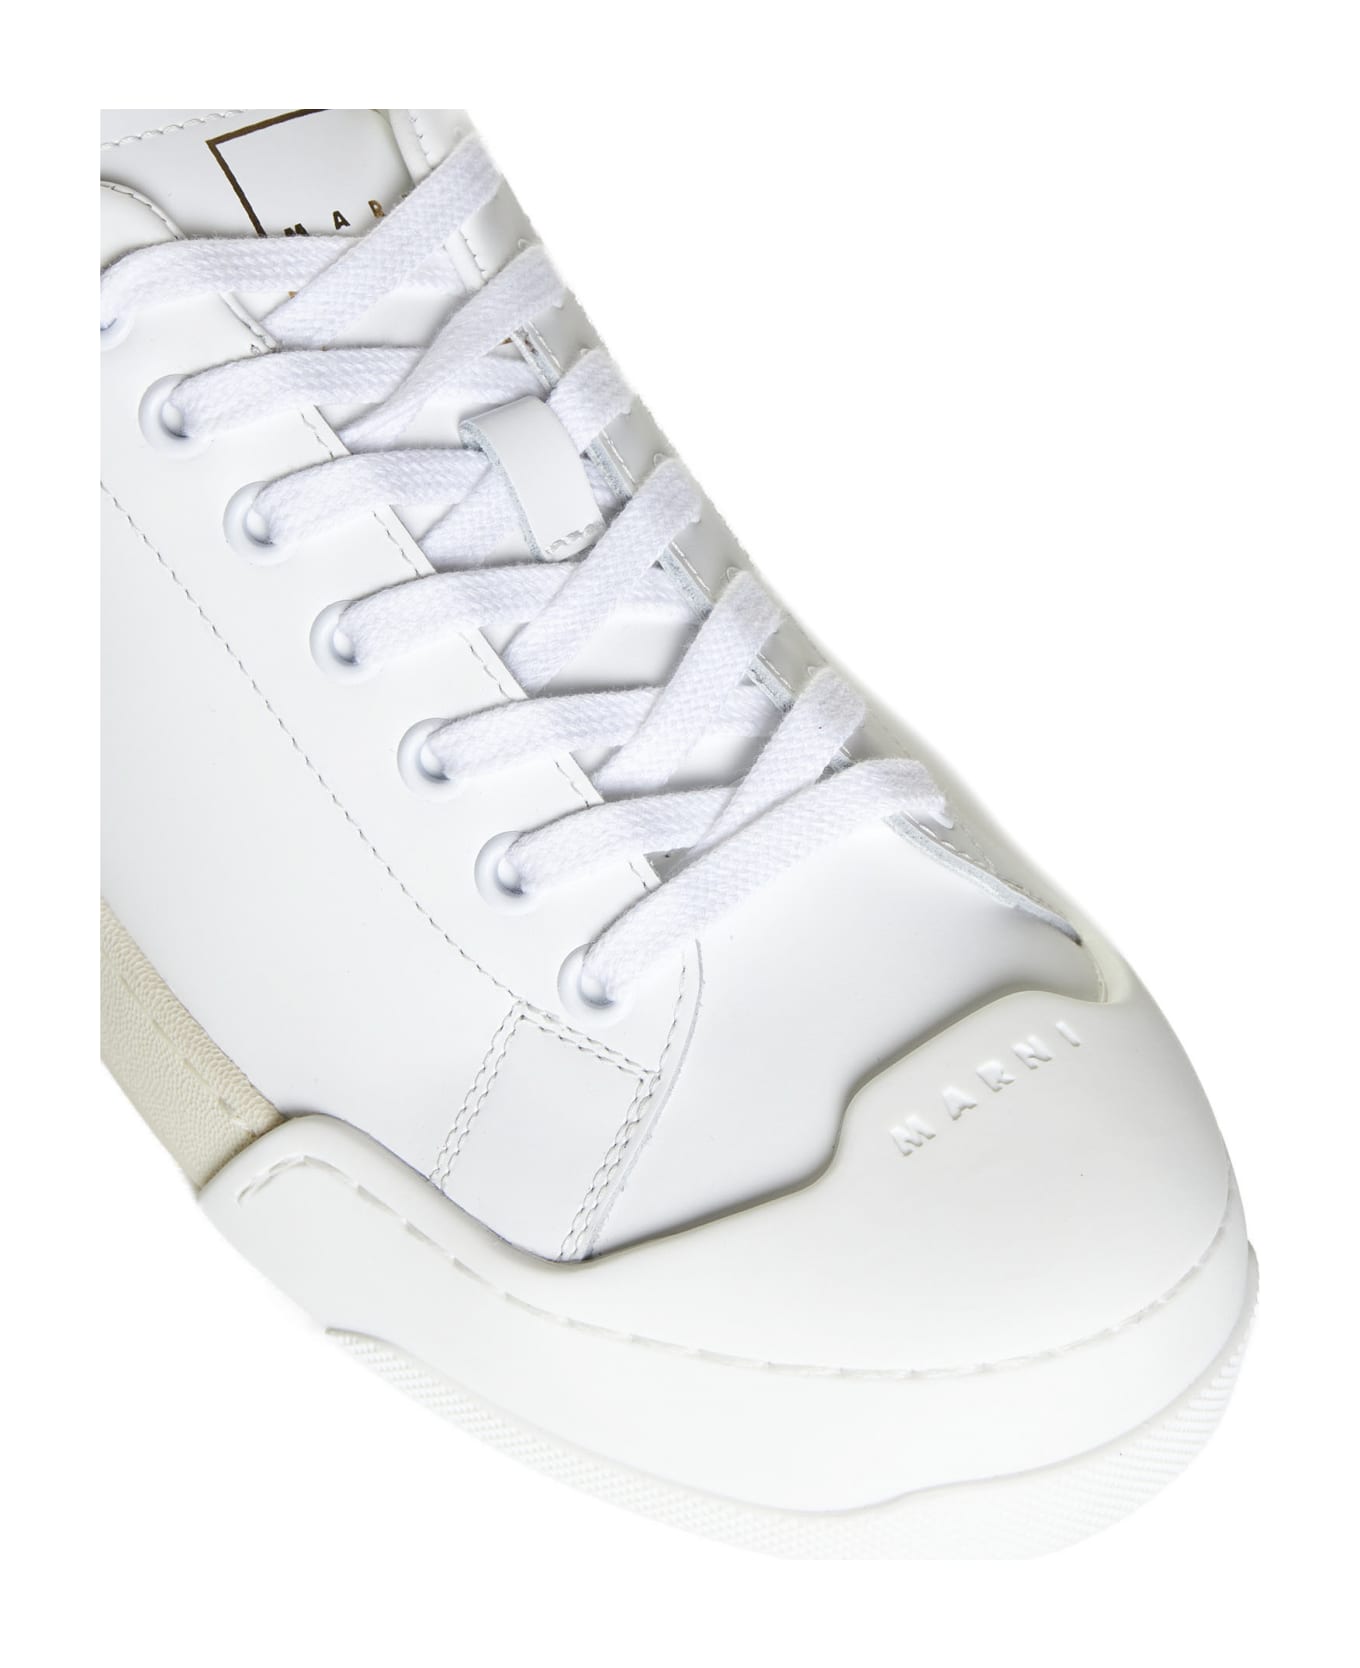 Marni Sneakers - Lily white/lily white